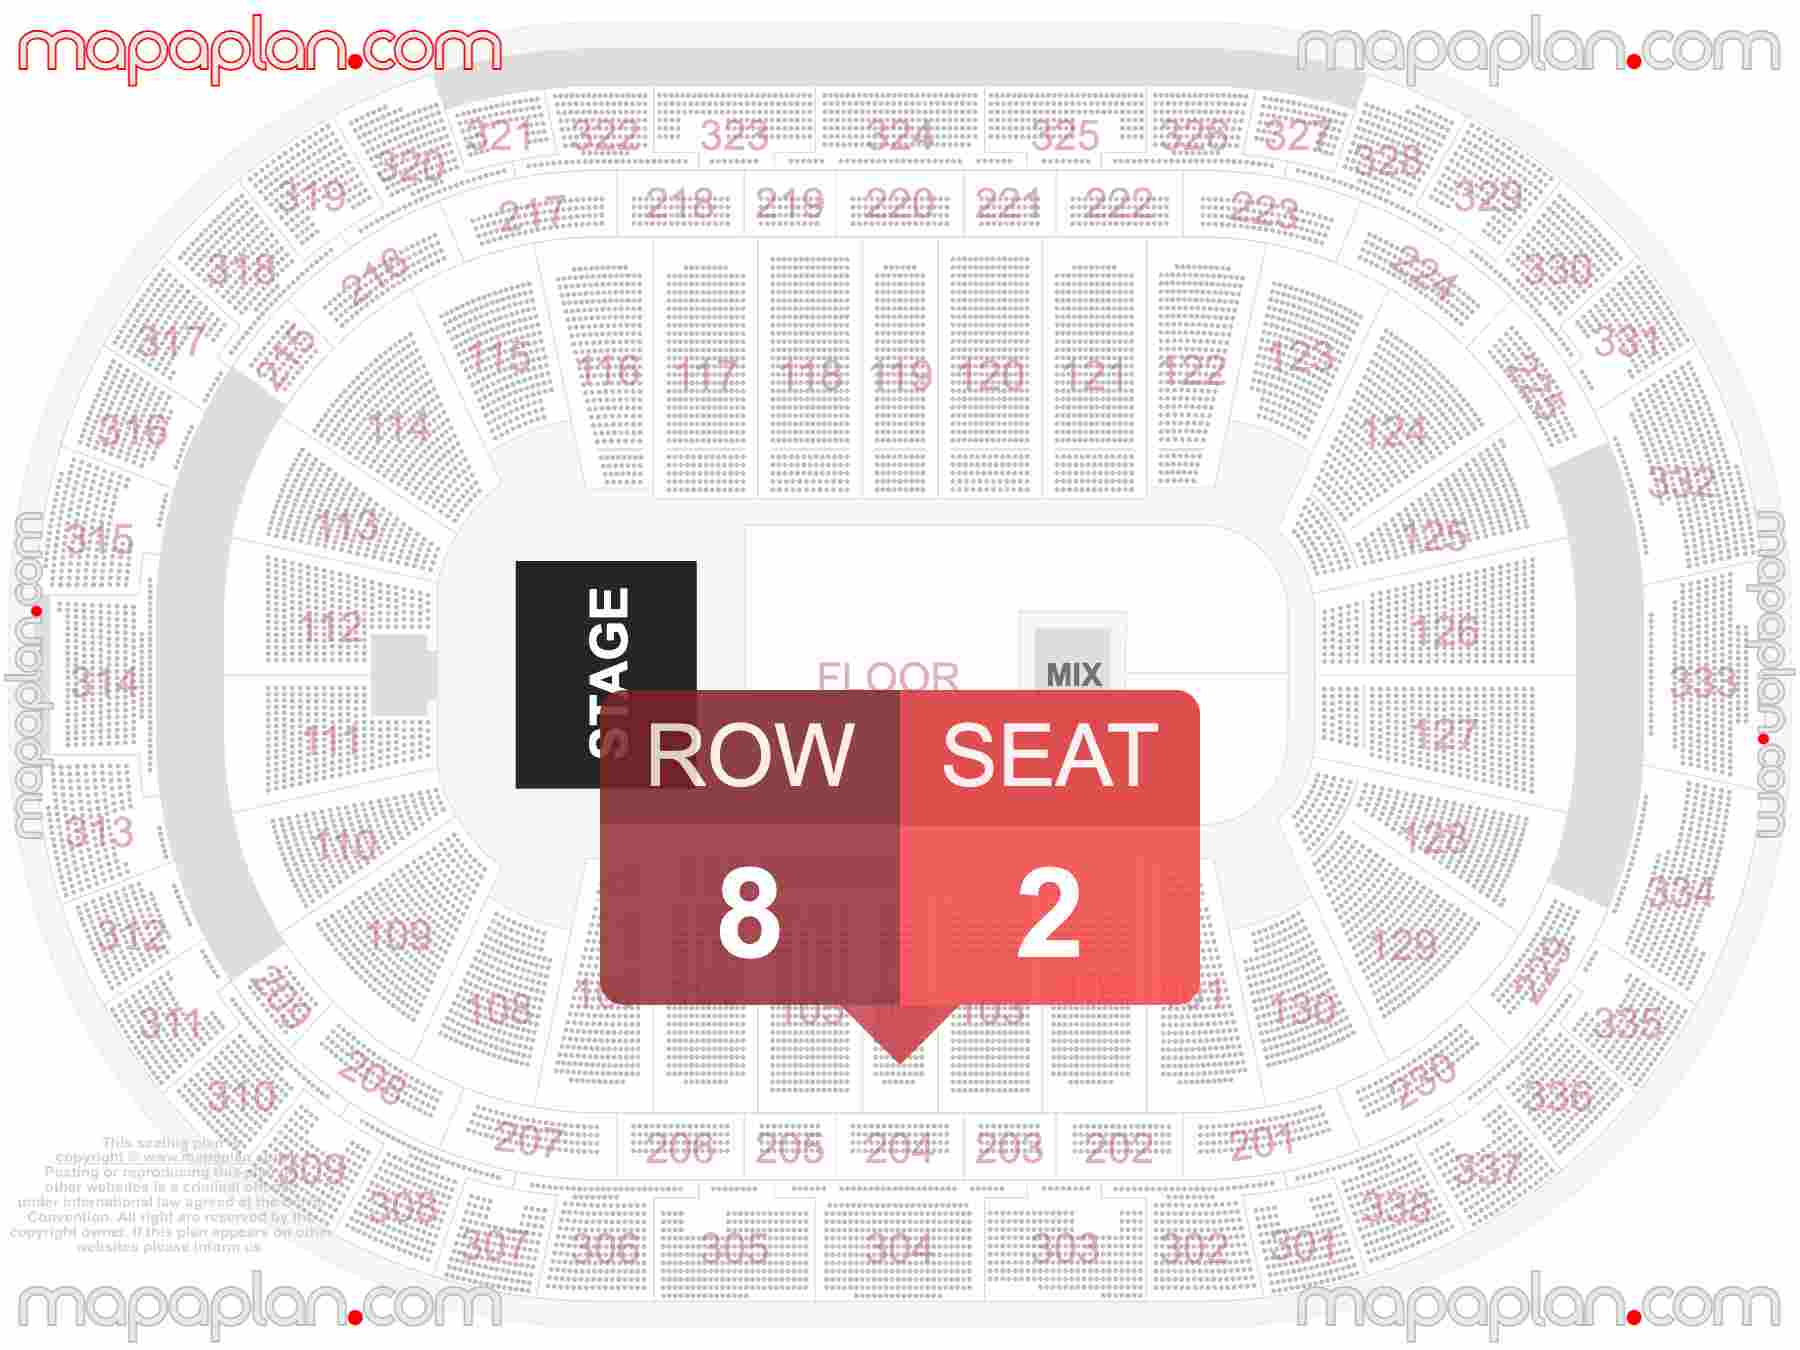 Raleigh PNC Arena seating chart Concert with floor general admission standing room only detailed seating chart - 3d virtual seat numbers and row layout